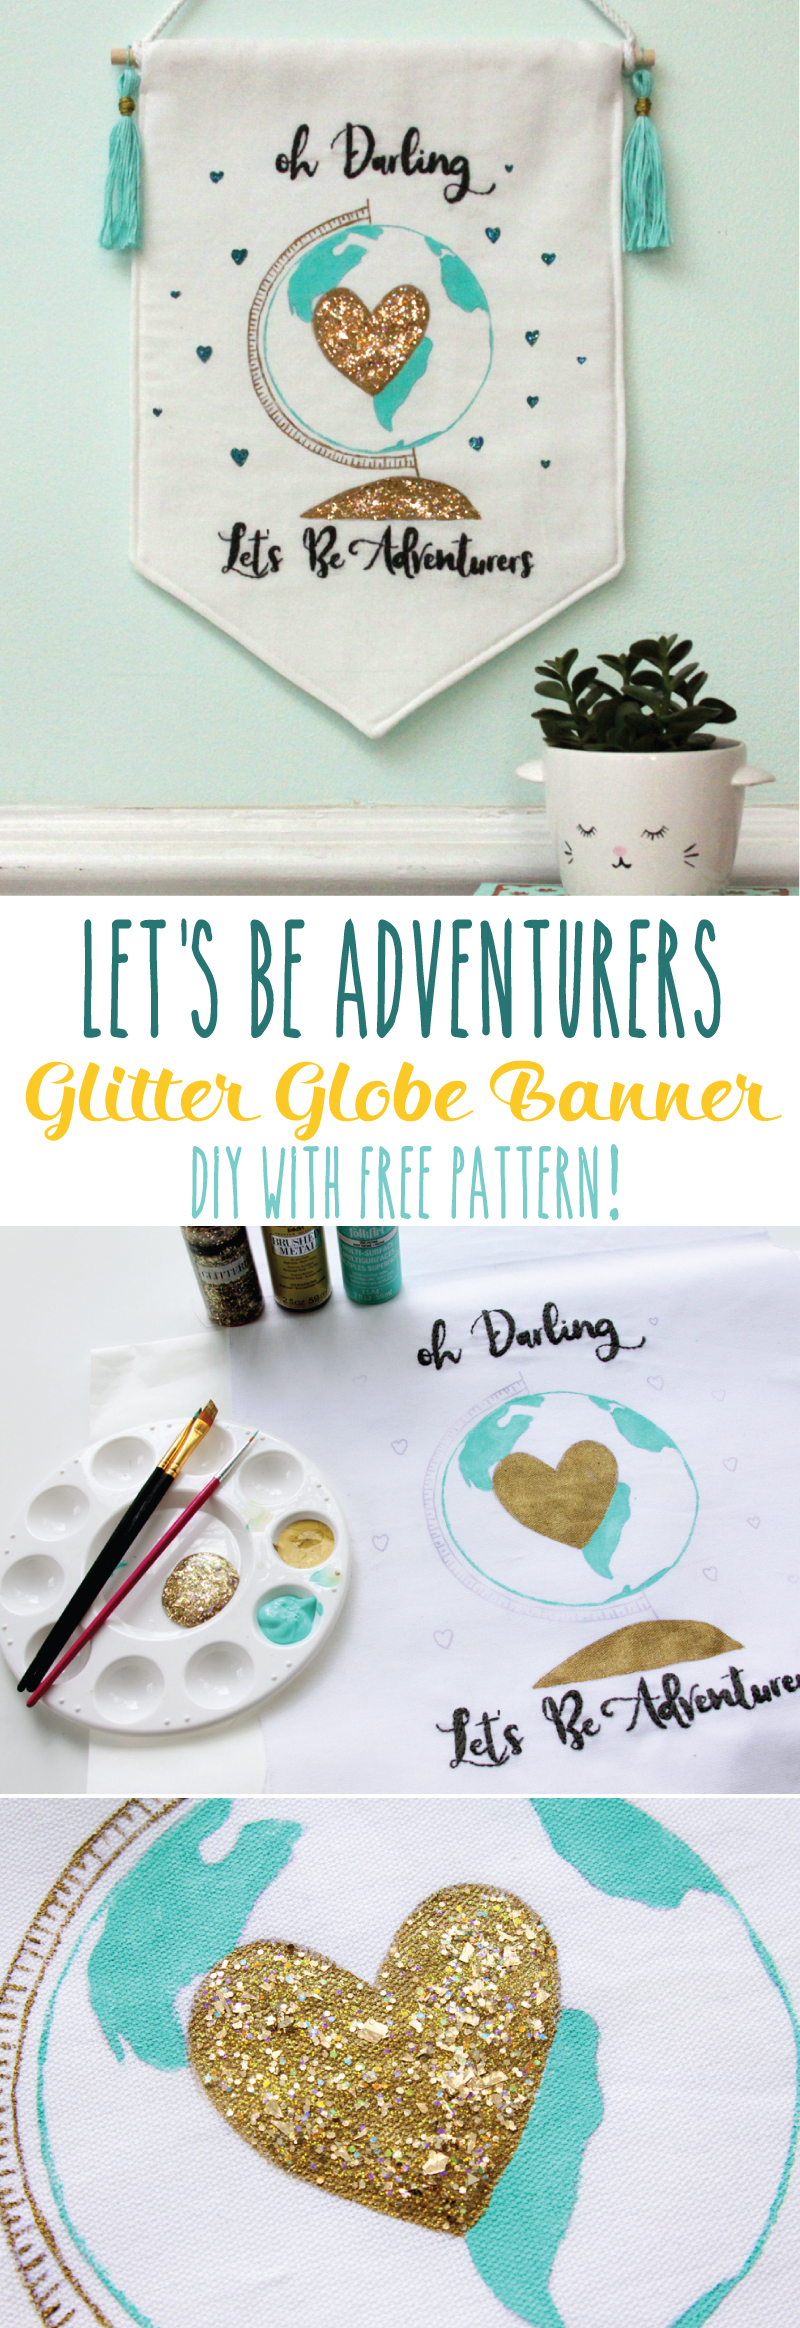 Let's Be Adventurers Glitter Globe Banner DIY with Free Pattern!